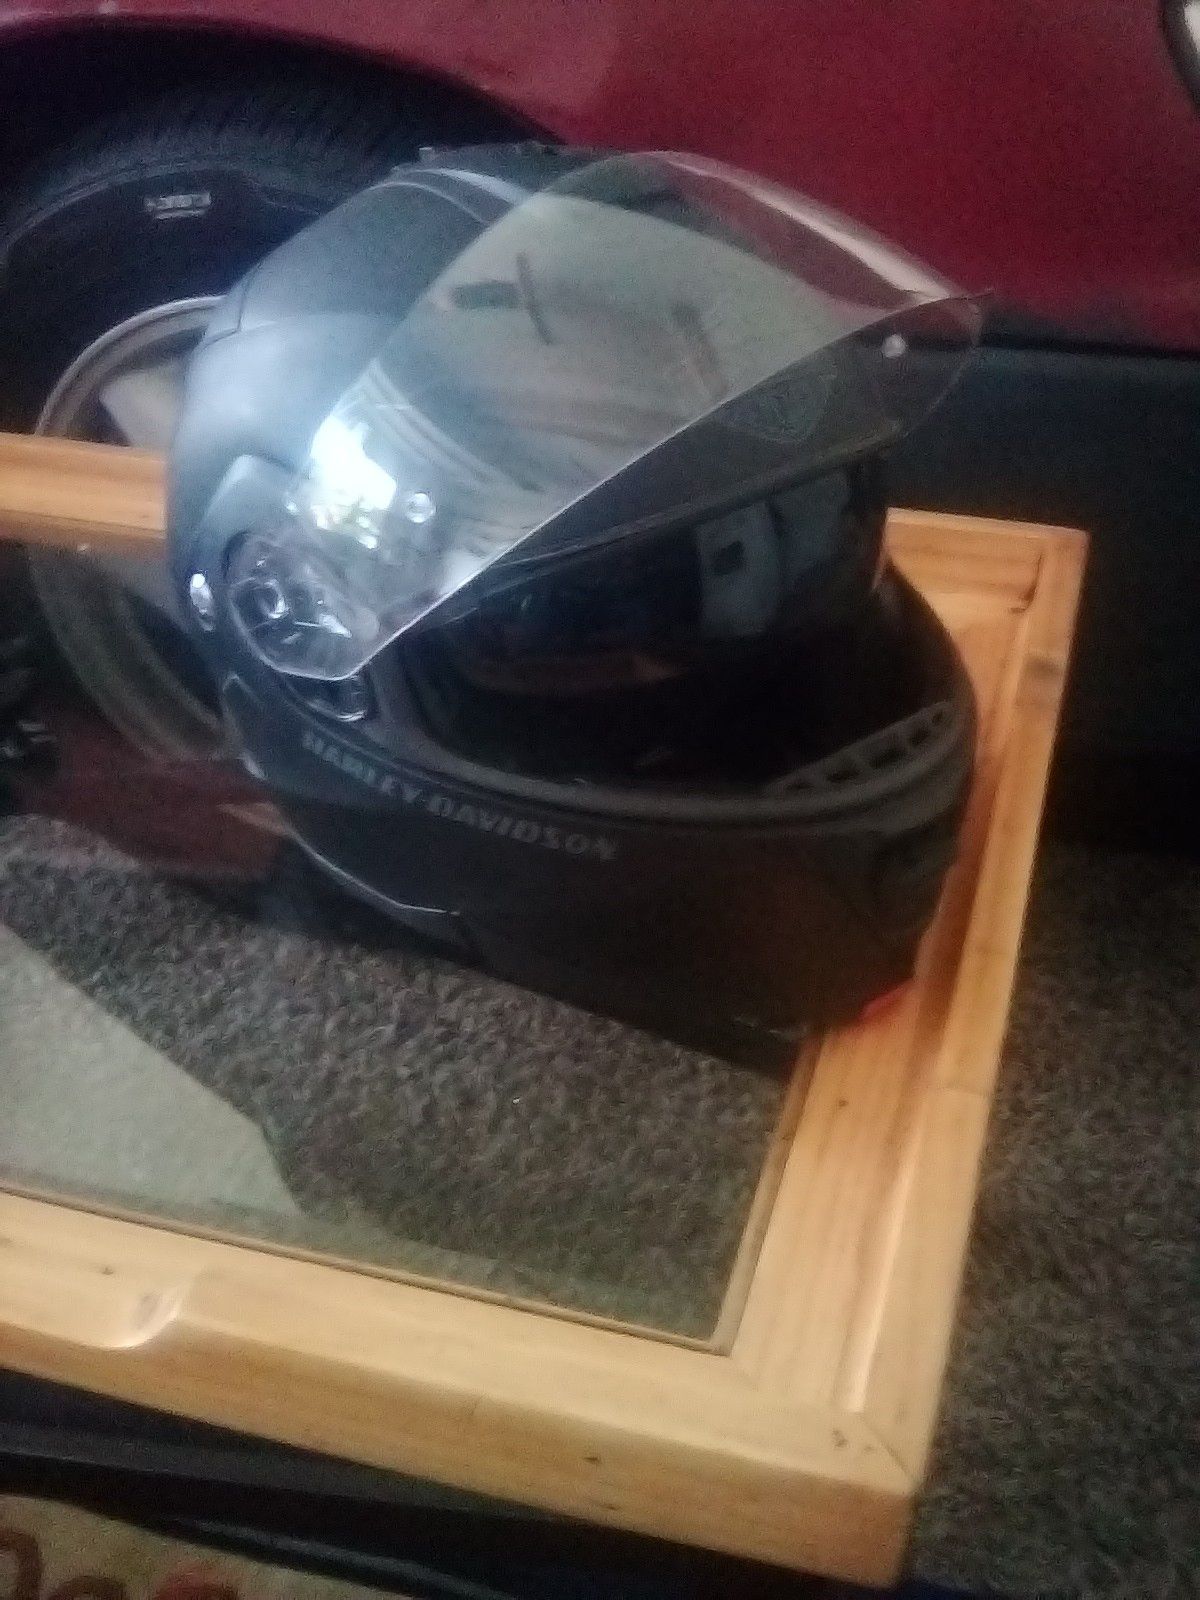 Harley-Davidson motorcycle helmet full face like new condition